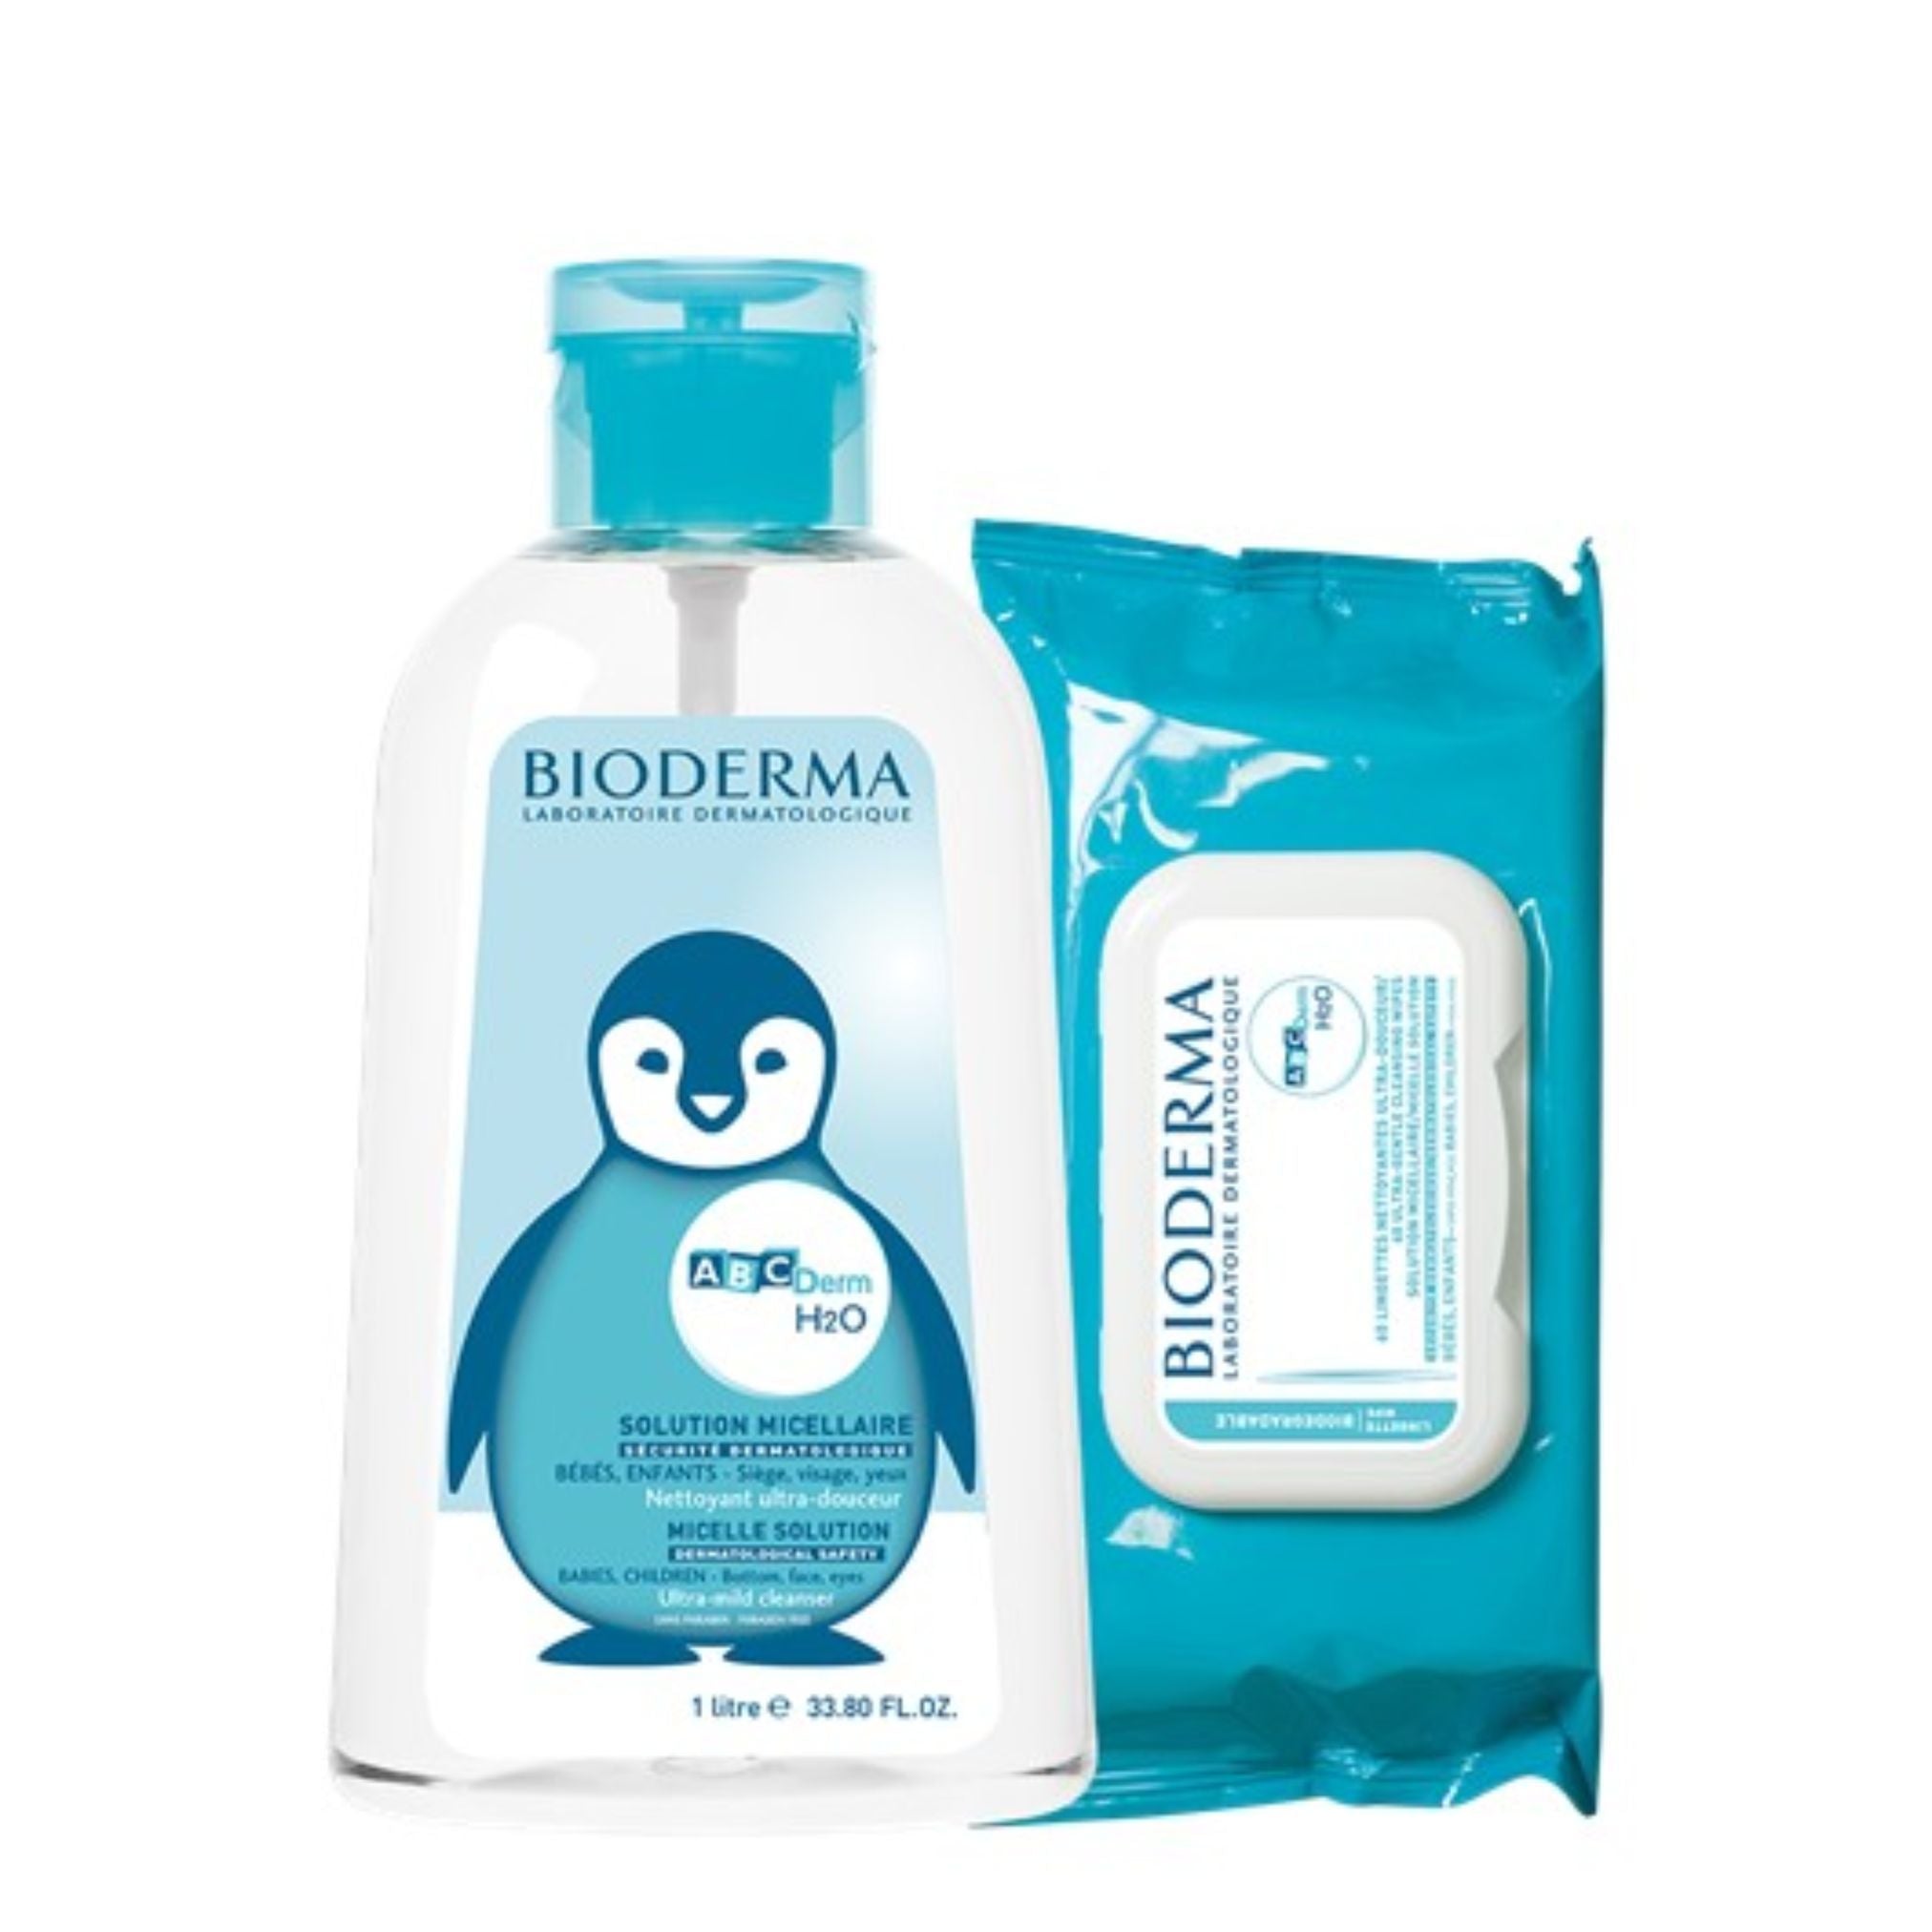 Bioderma Promo Pack: Bioderma ABCDerm H2O Micelle Solution 1L + Bioderma ABCDerm H2O Cleansing Wipes x60